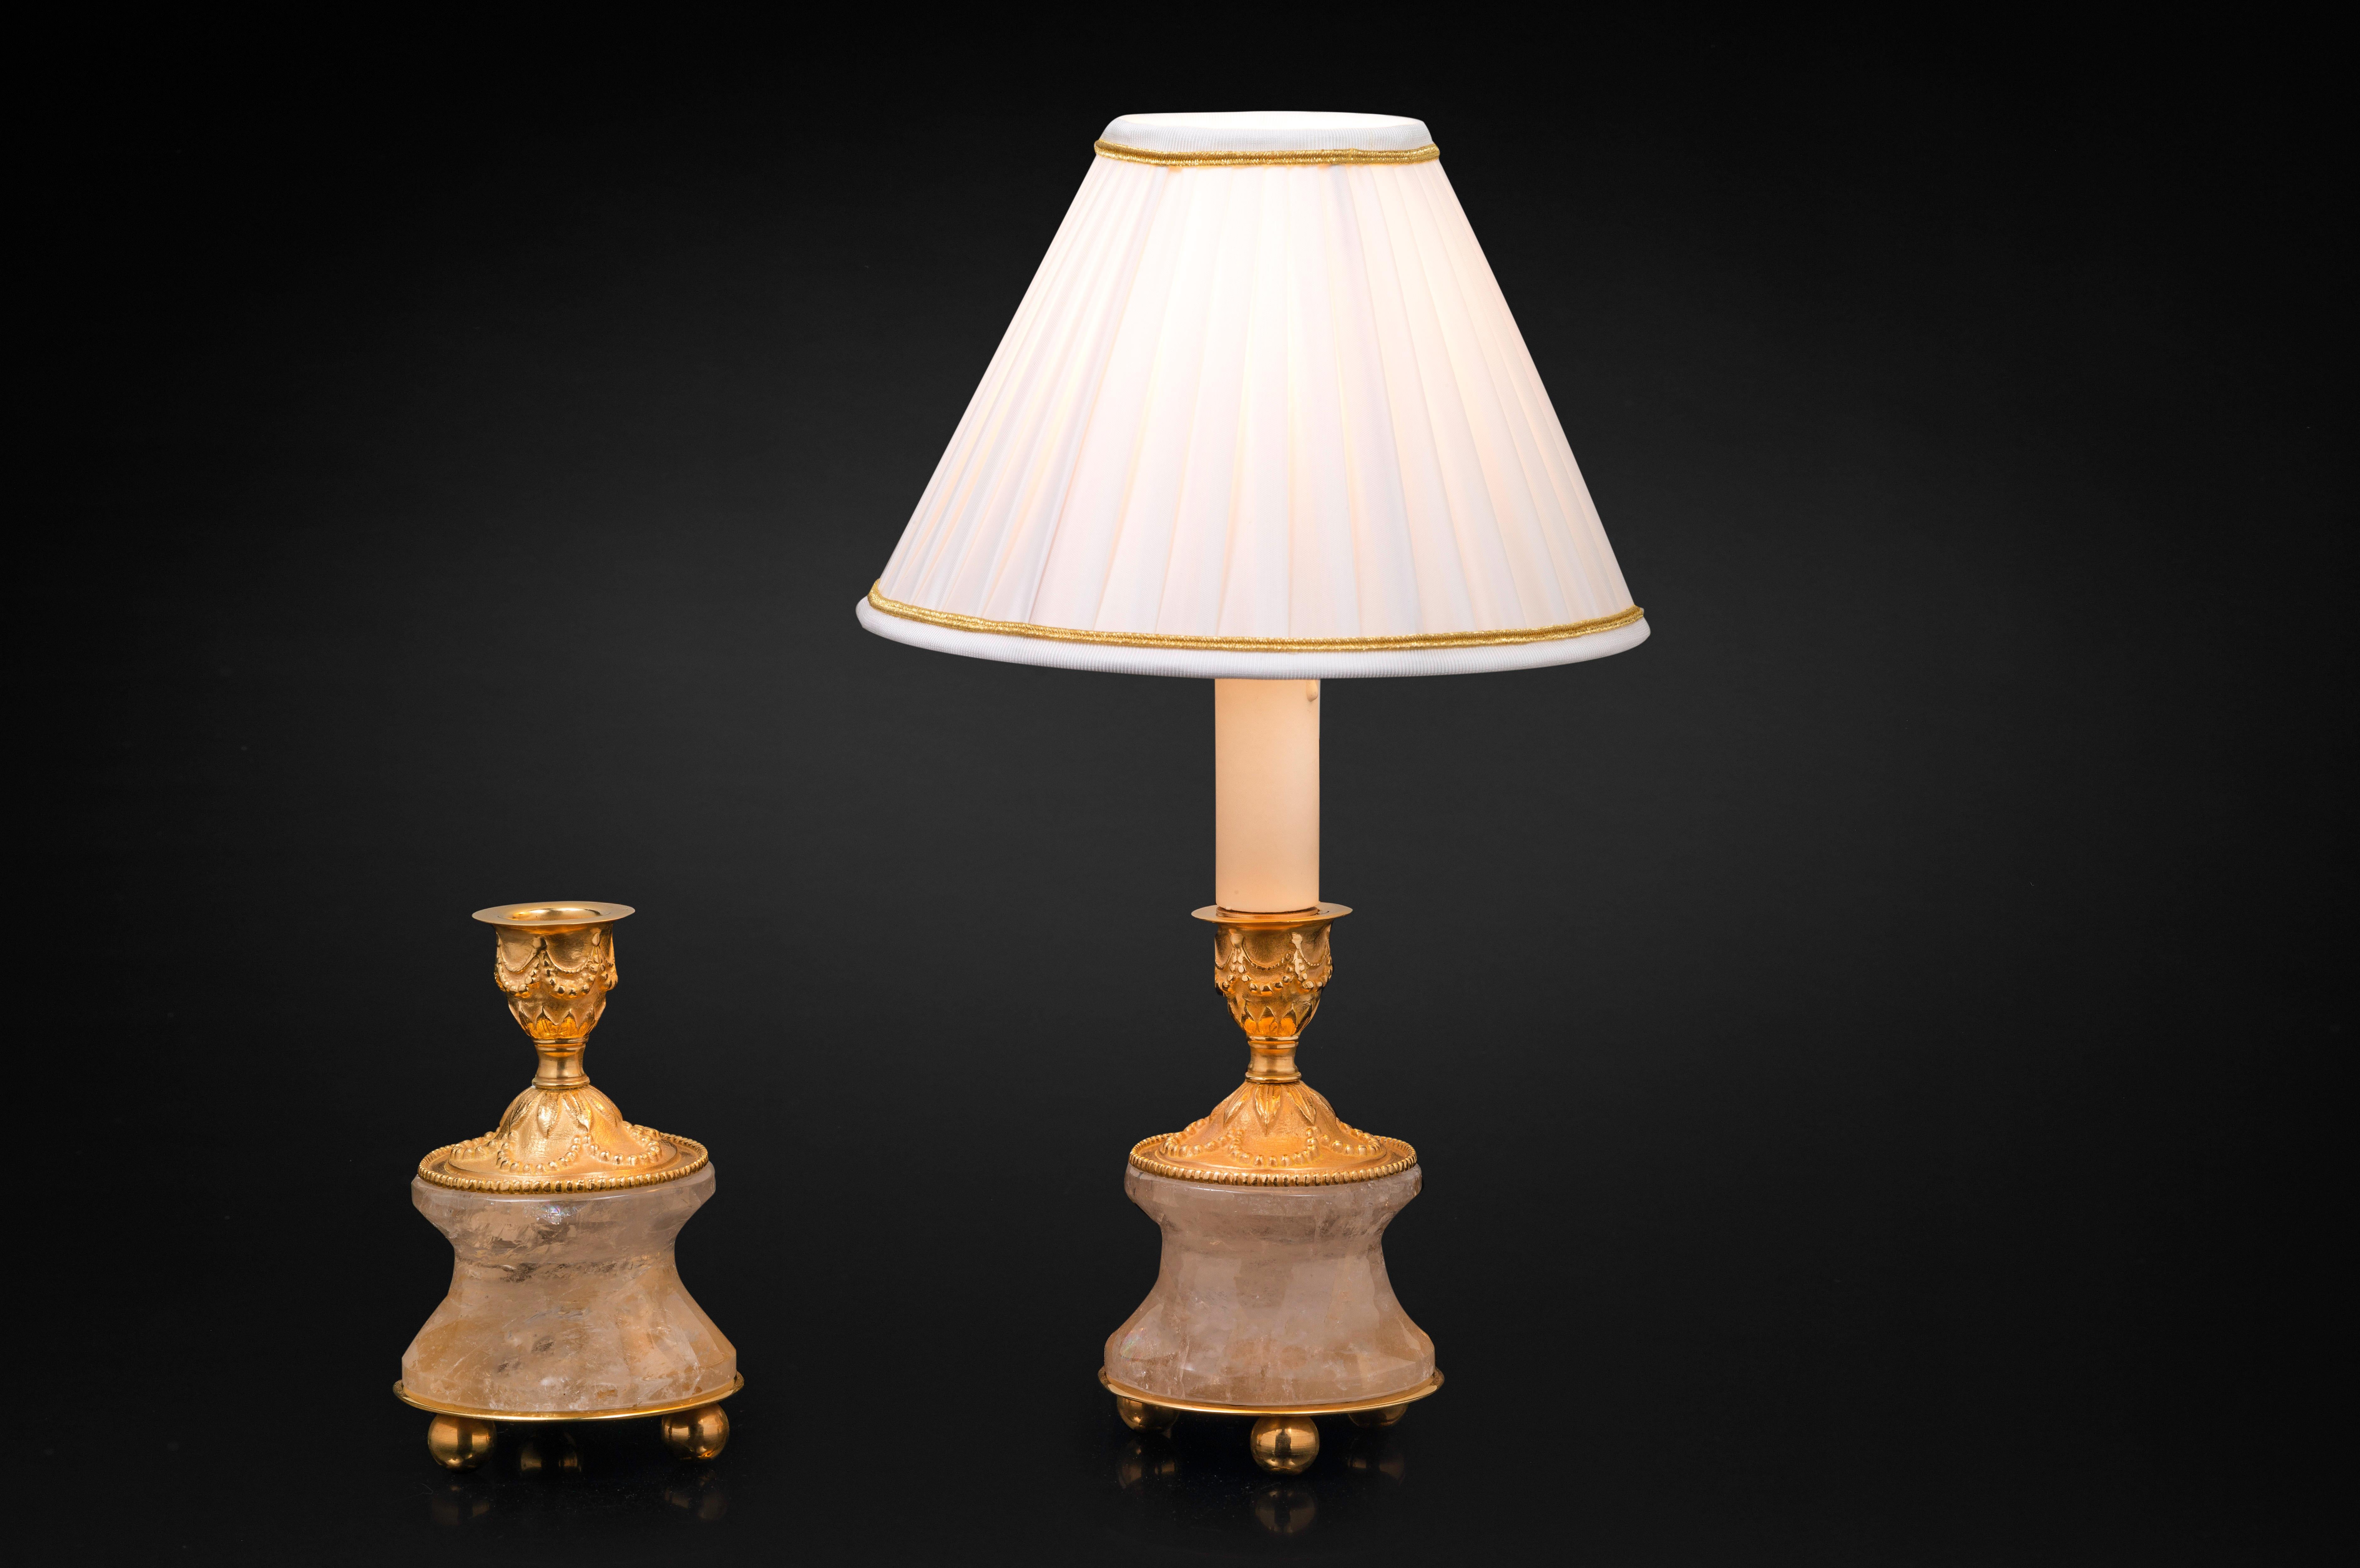 French Pair of Rock Crystal and Gilt-Bronze Lamps /Candlesticks Louis XVI Style For Sale